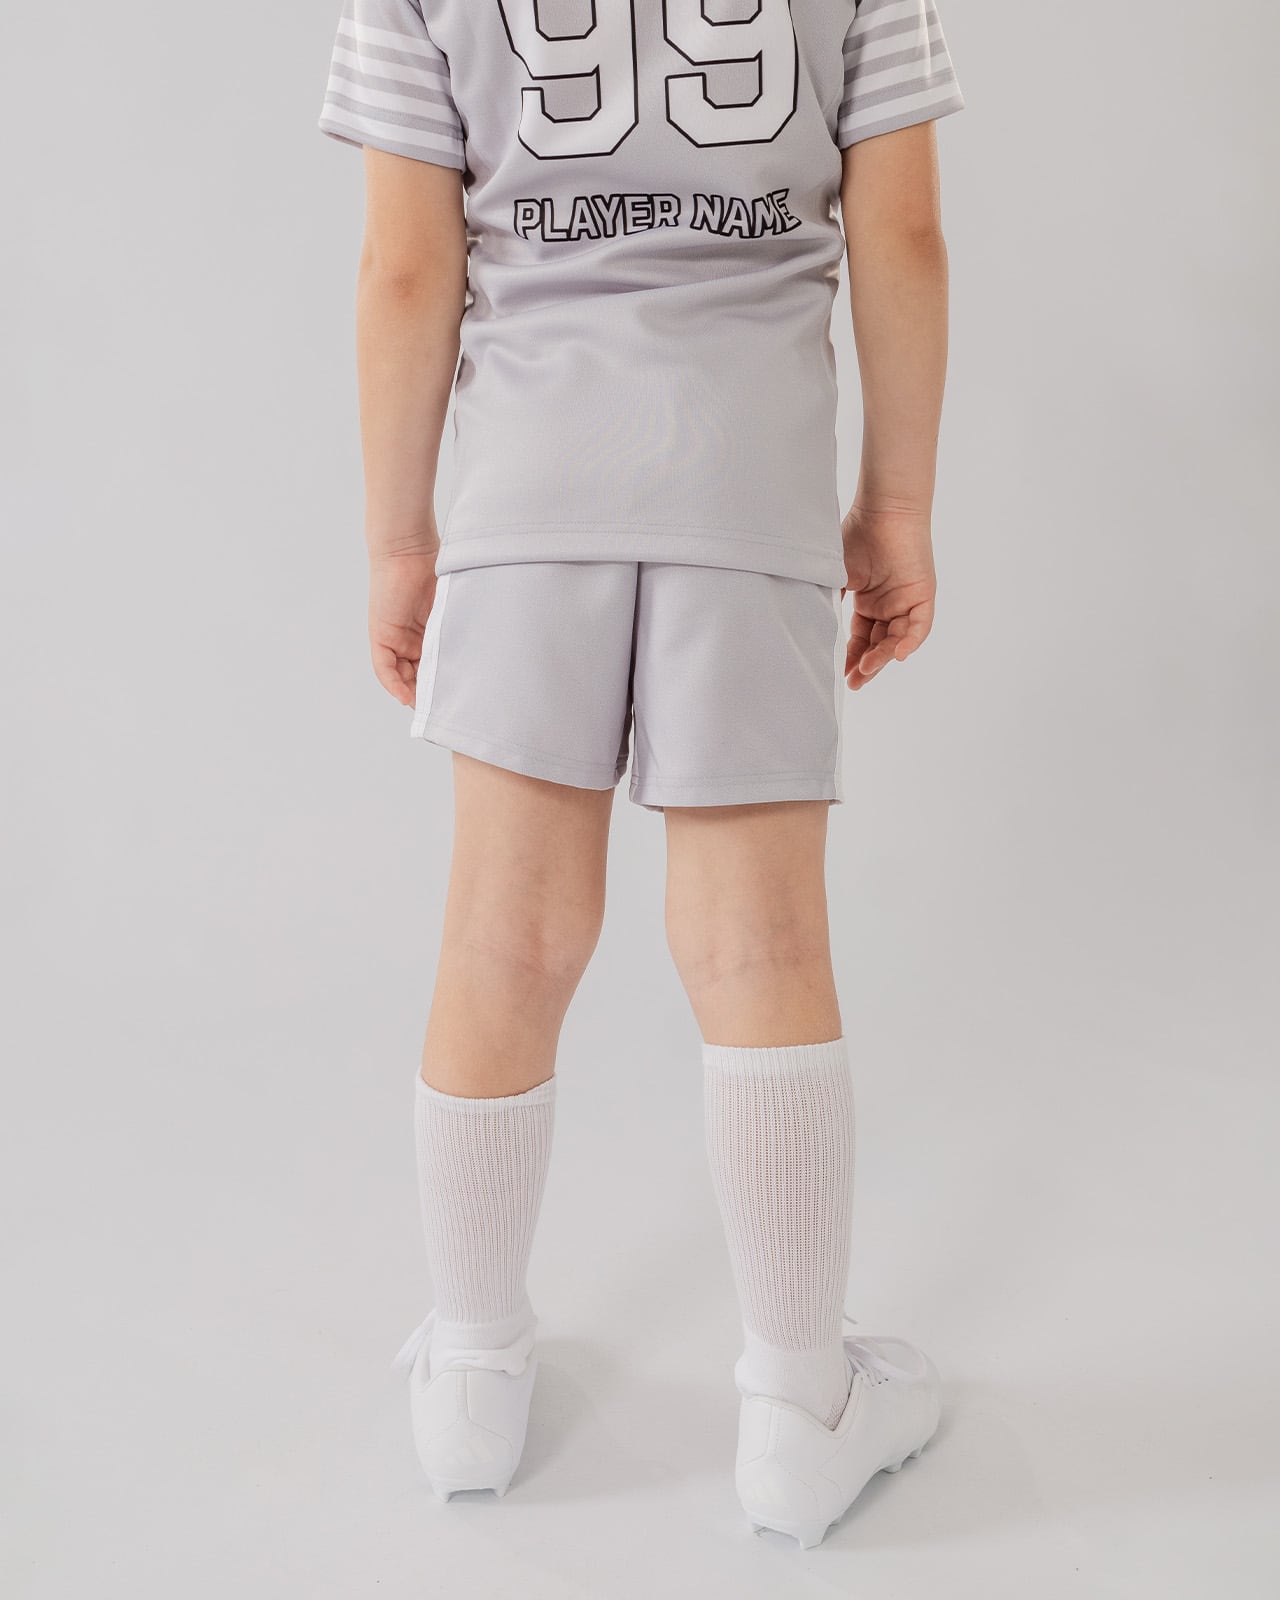 Bray kid's rugby shorts